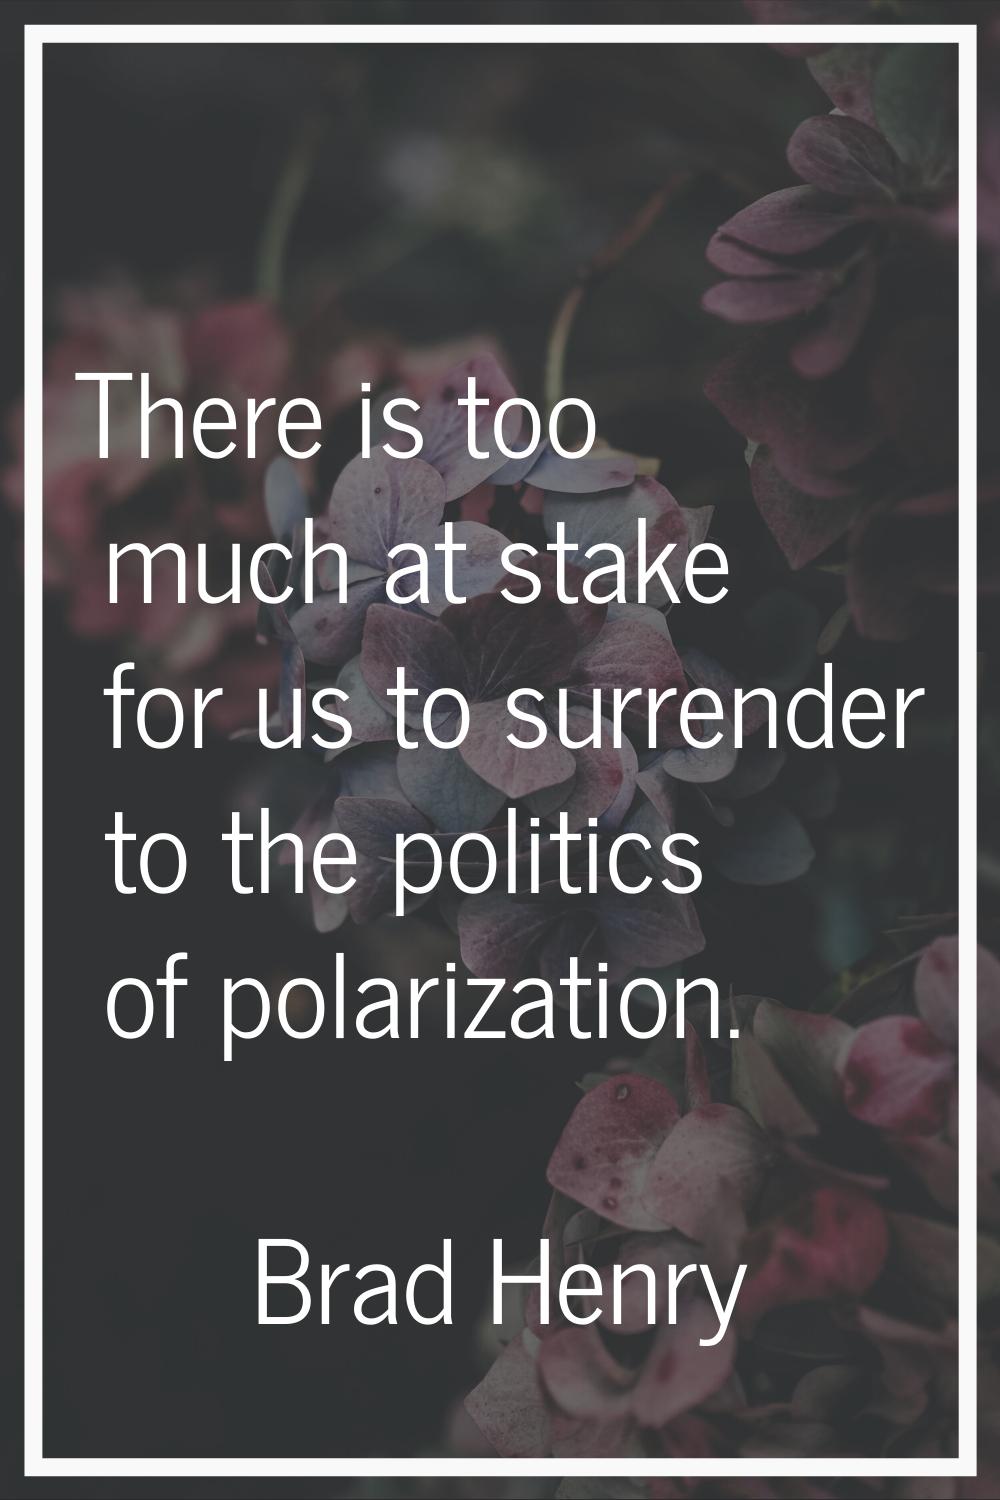 There is too much at stake for us to surrender to the politics of polarization.